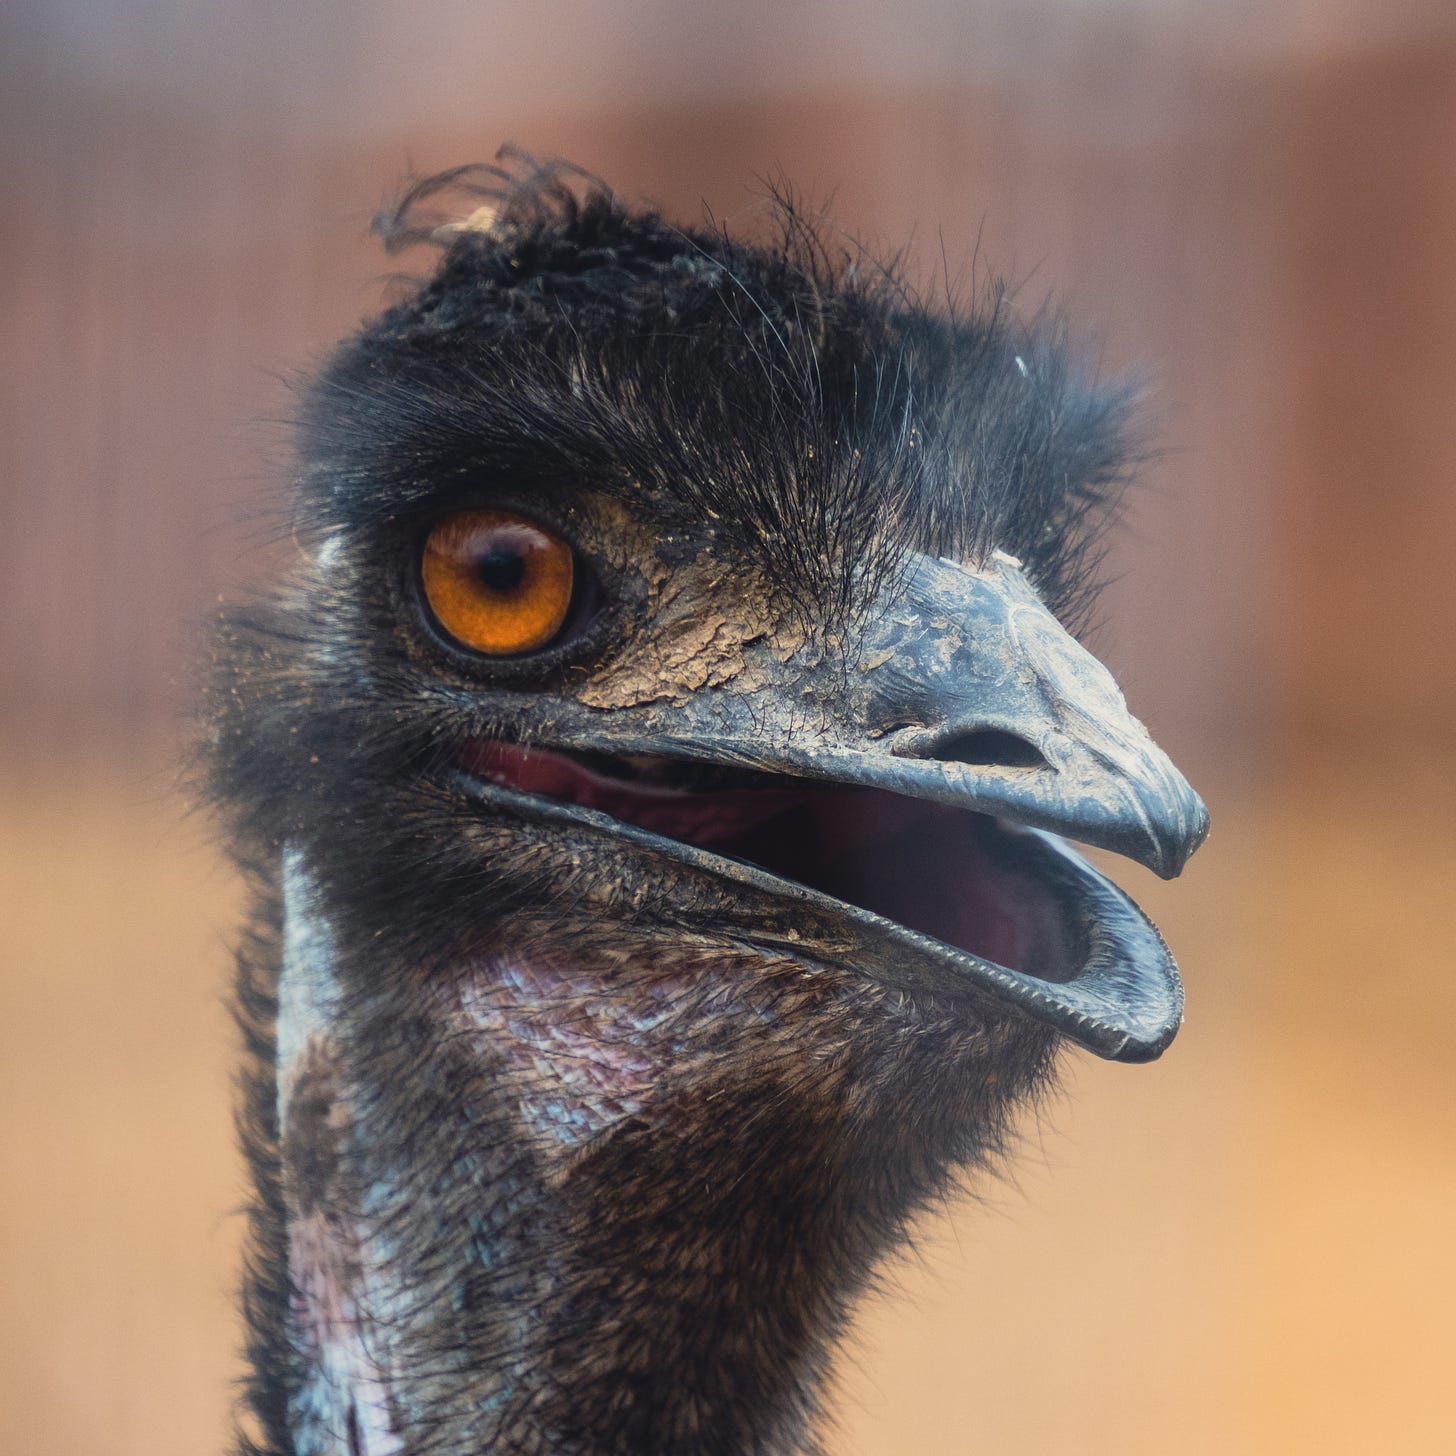 A close-up portrait of an emu with their beak slightly open and looking like an absolute Muppet